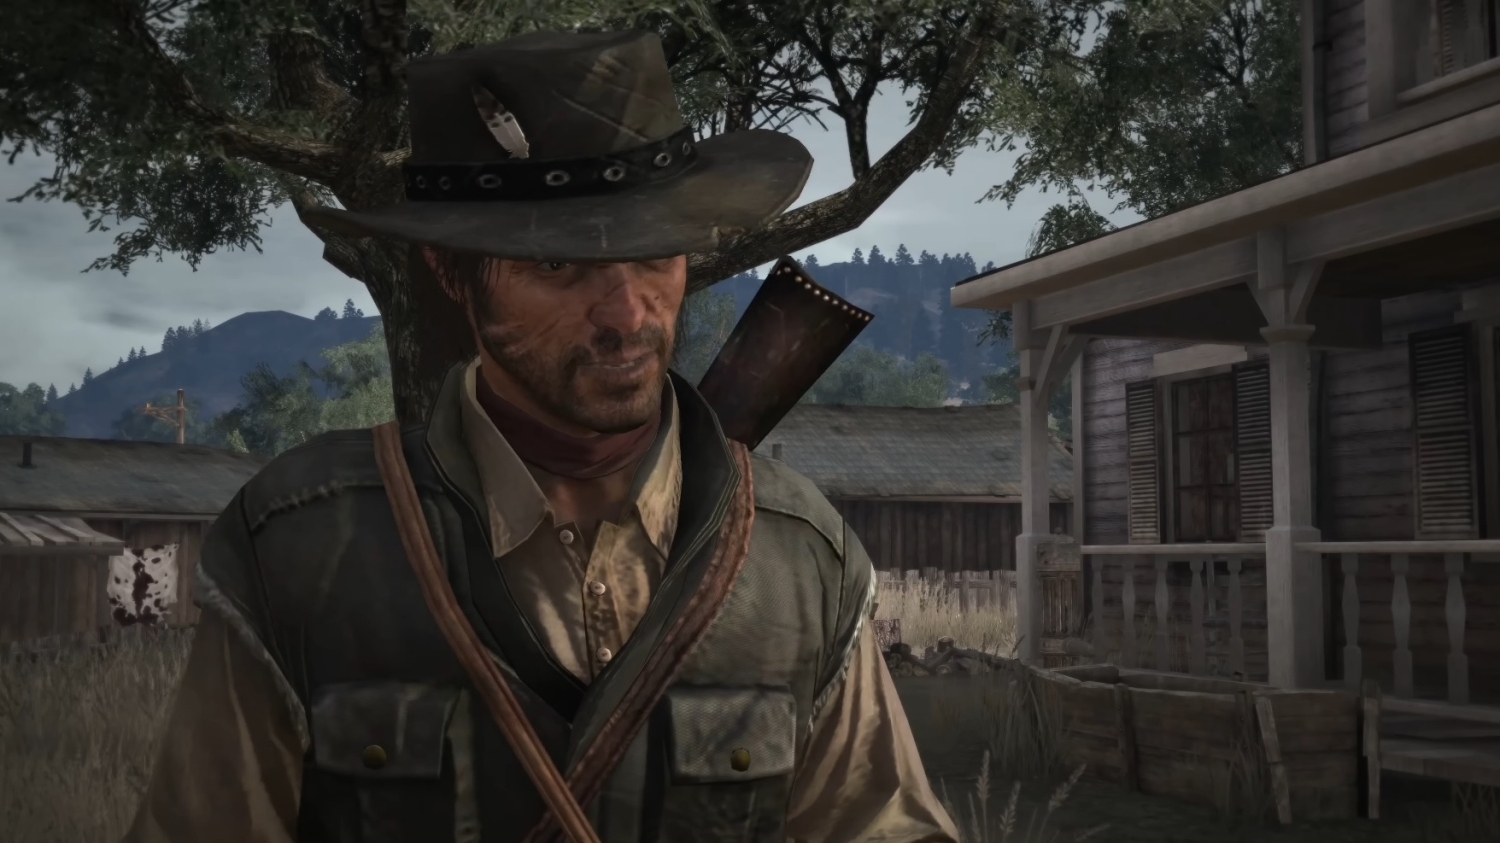 Emulating the original Red Dead Redemption on PC sees performance hit 250  fps on an RTX 4090